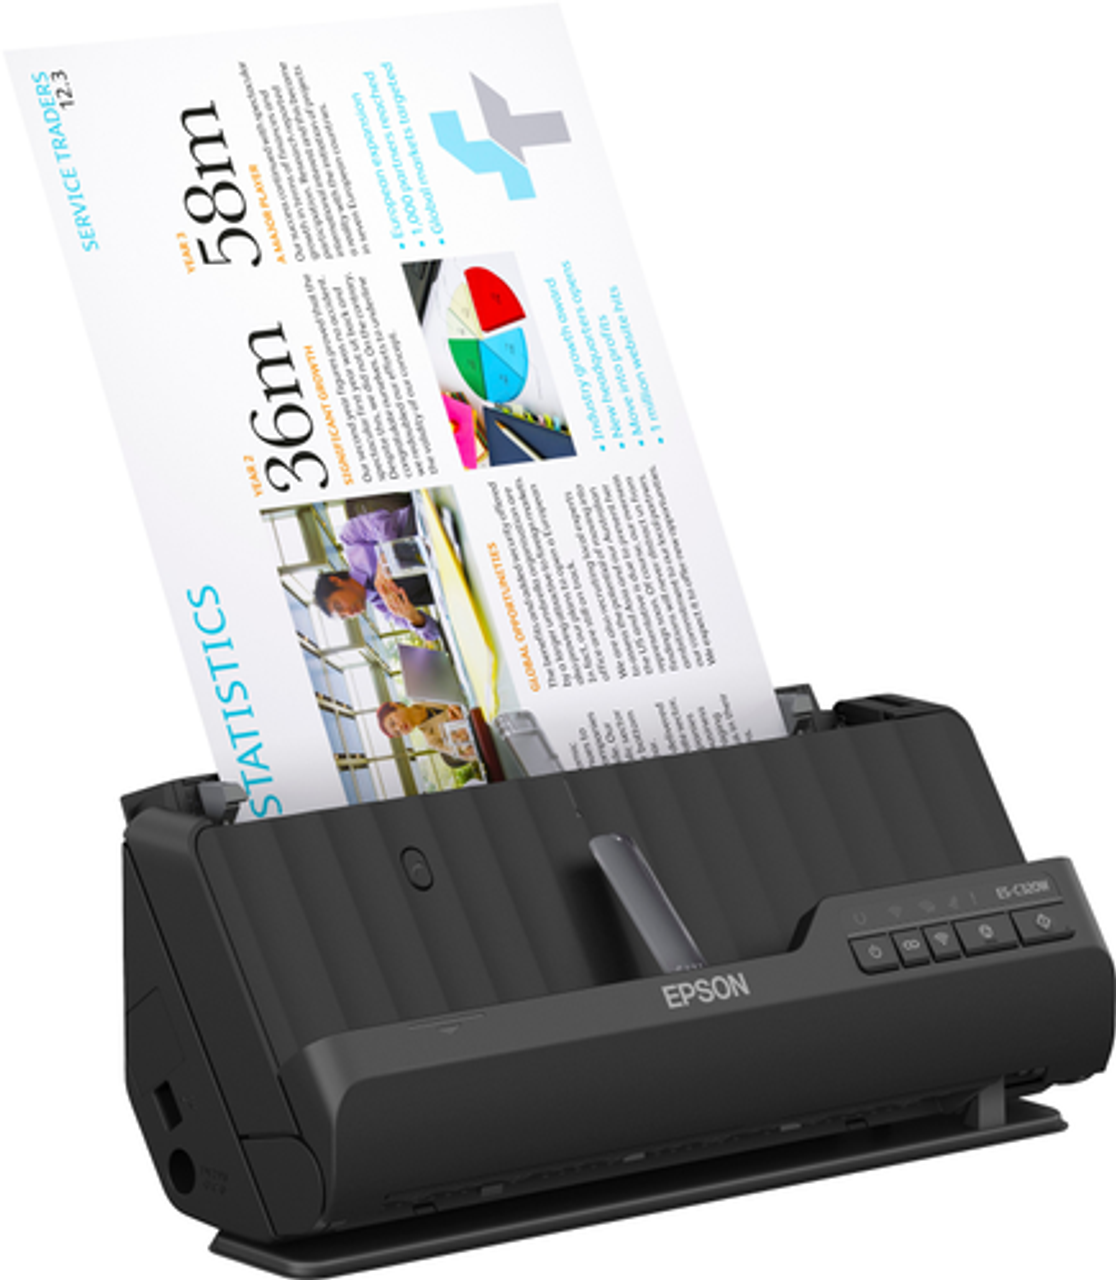 Epson Workforce Es C320w Wireless Compact Desktop Document Scanner With 2 Sided Scanning And 7236